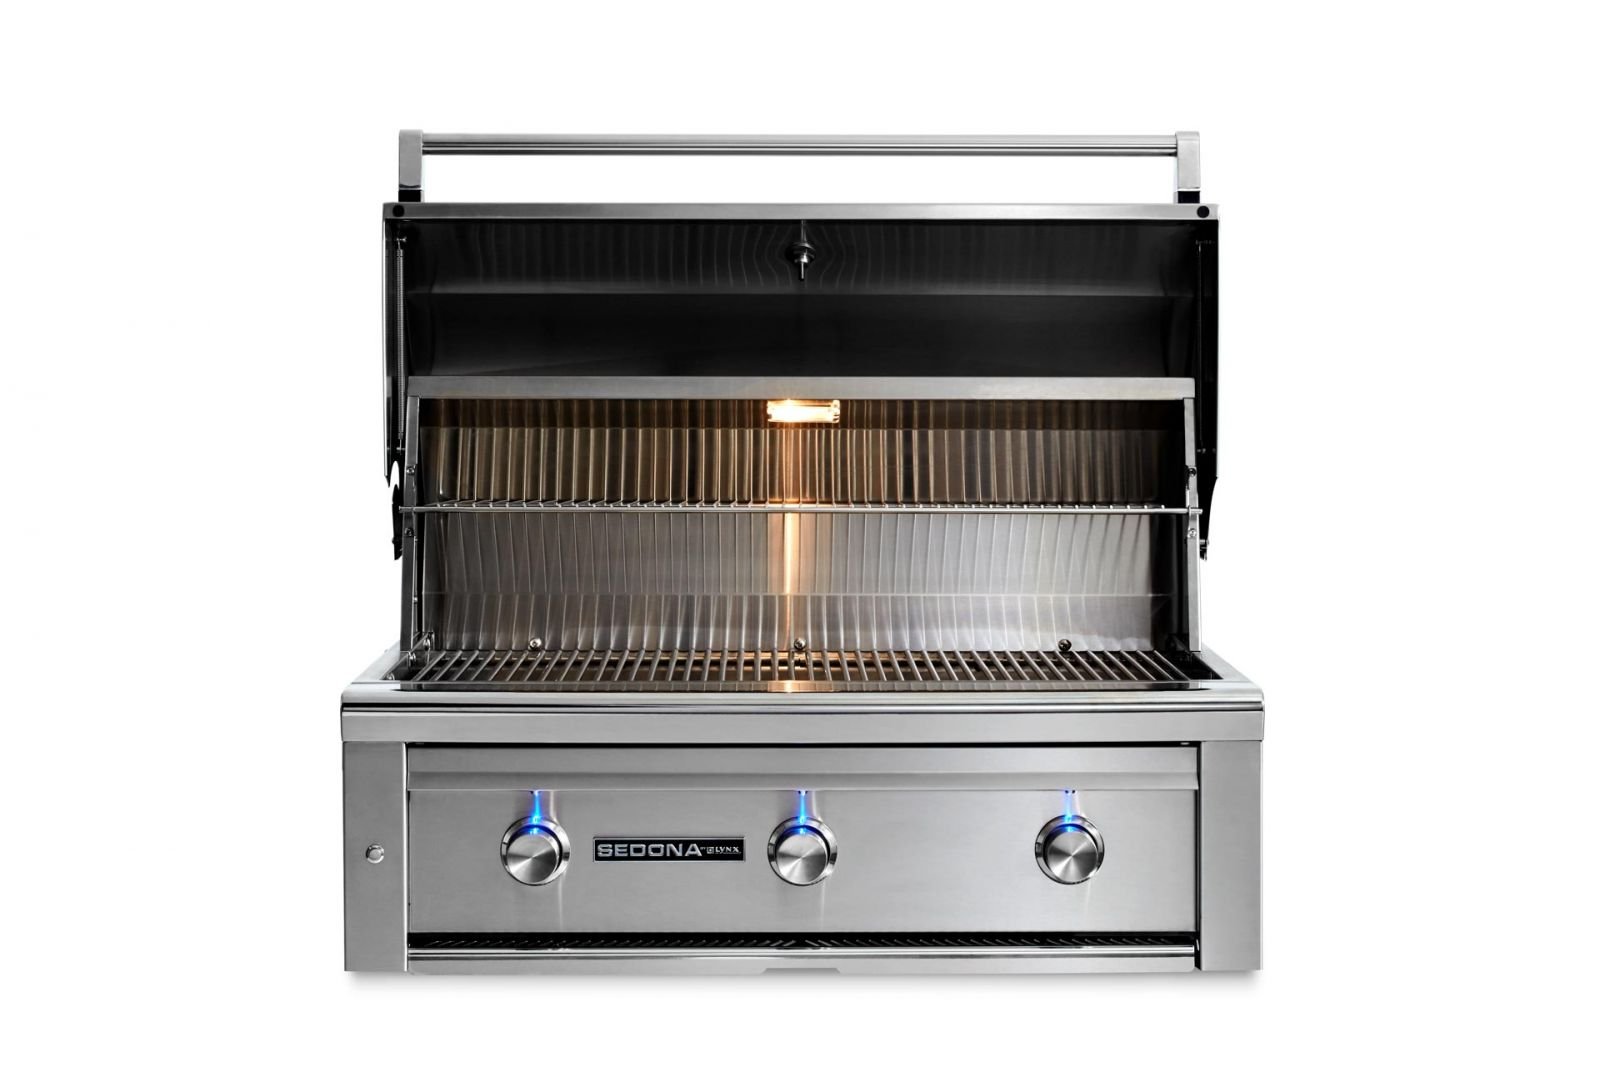 36" Built-in Grill with 3 Stainless Steel Burners (L600)